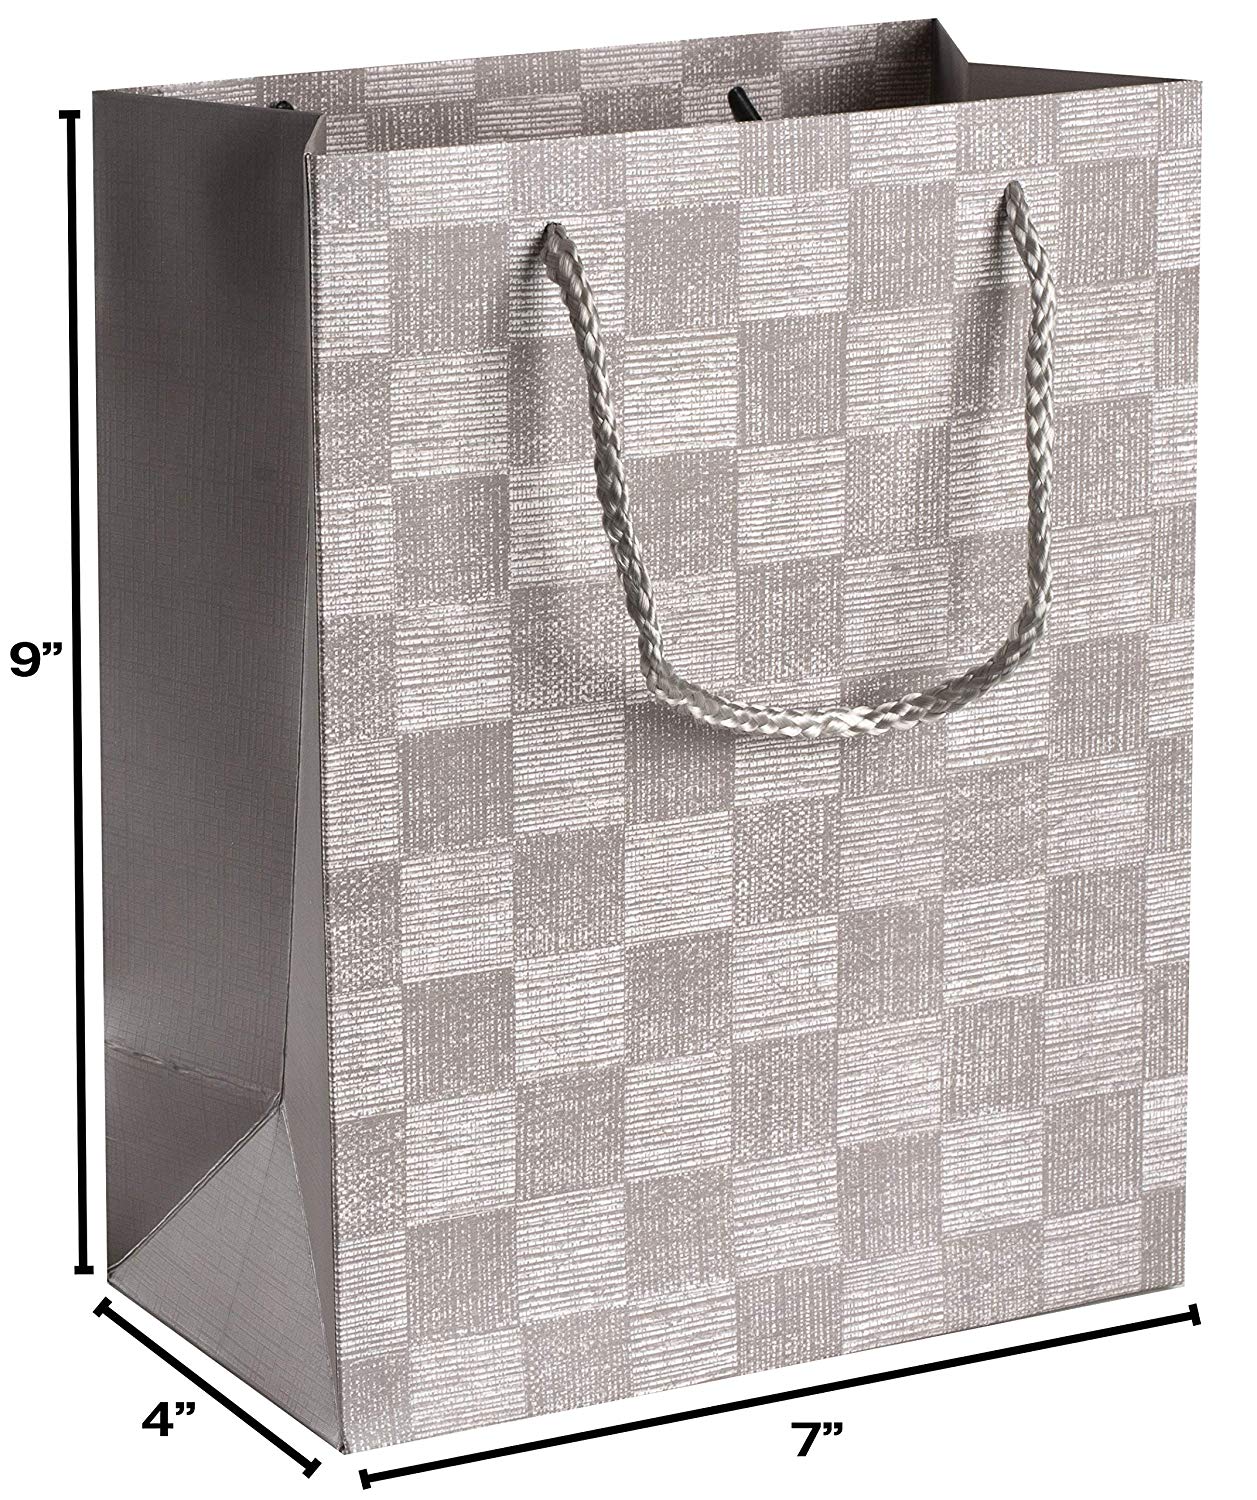 Checkered Gift Bags Set (12 Pack)- 9”x 7”x 4” Unique Design with